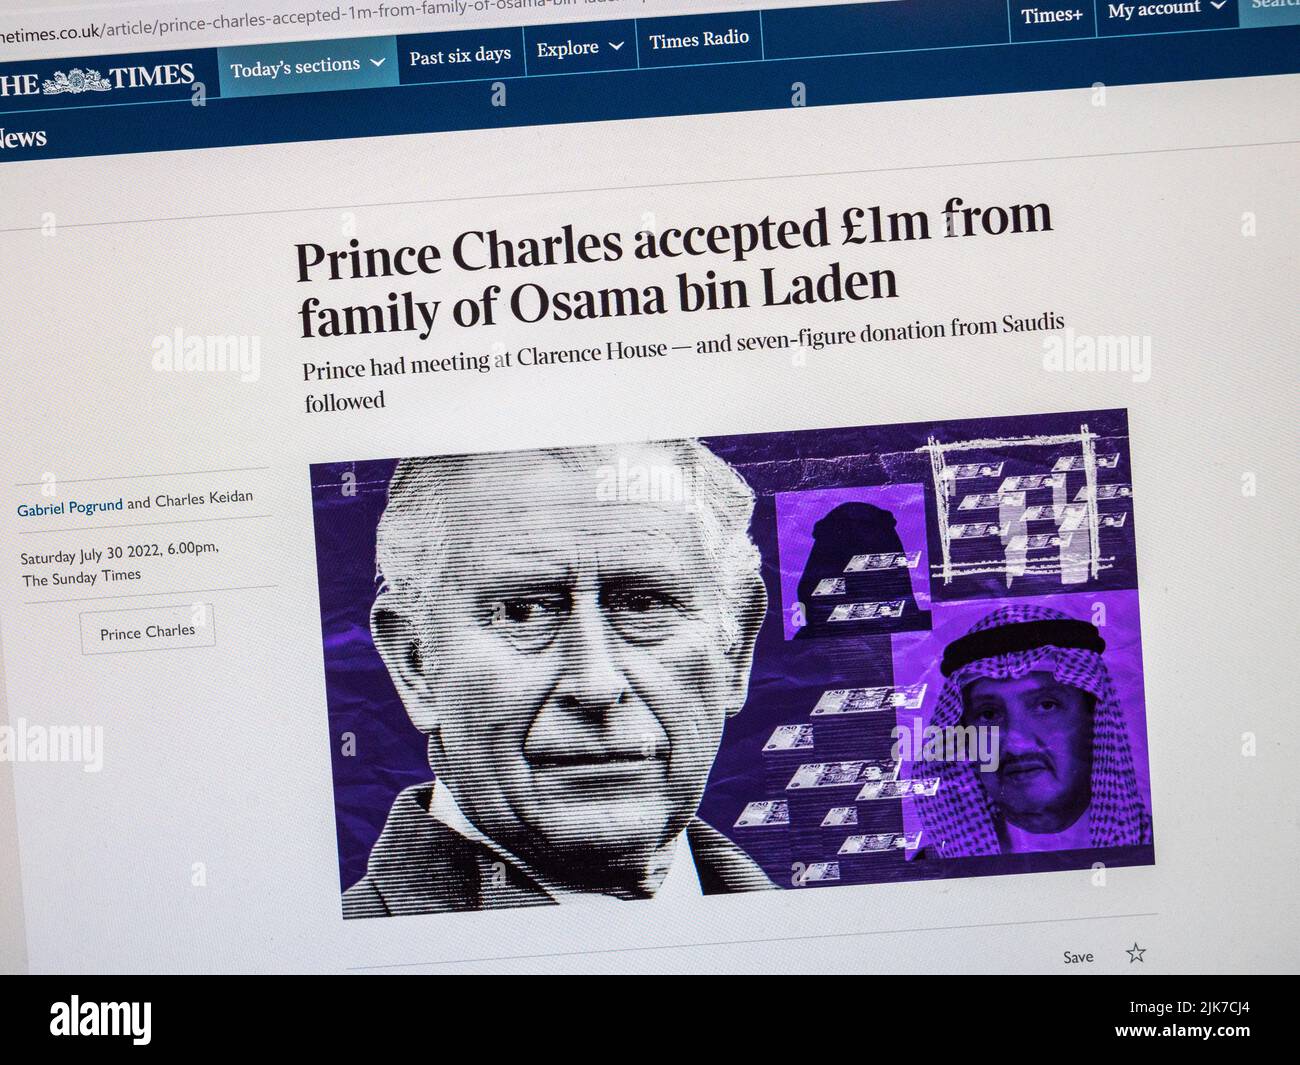 'Prince Charles accepted £1m from family of Osama Bin Laden' headline on the Times newspaper web site on 30th July 2022. Stock Photo